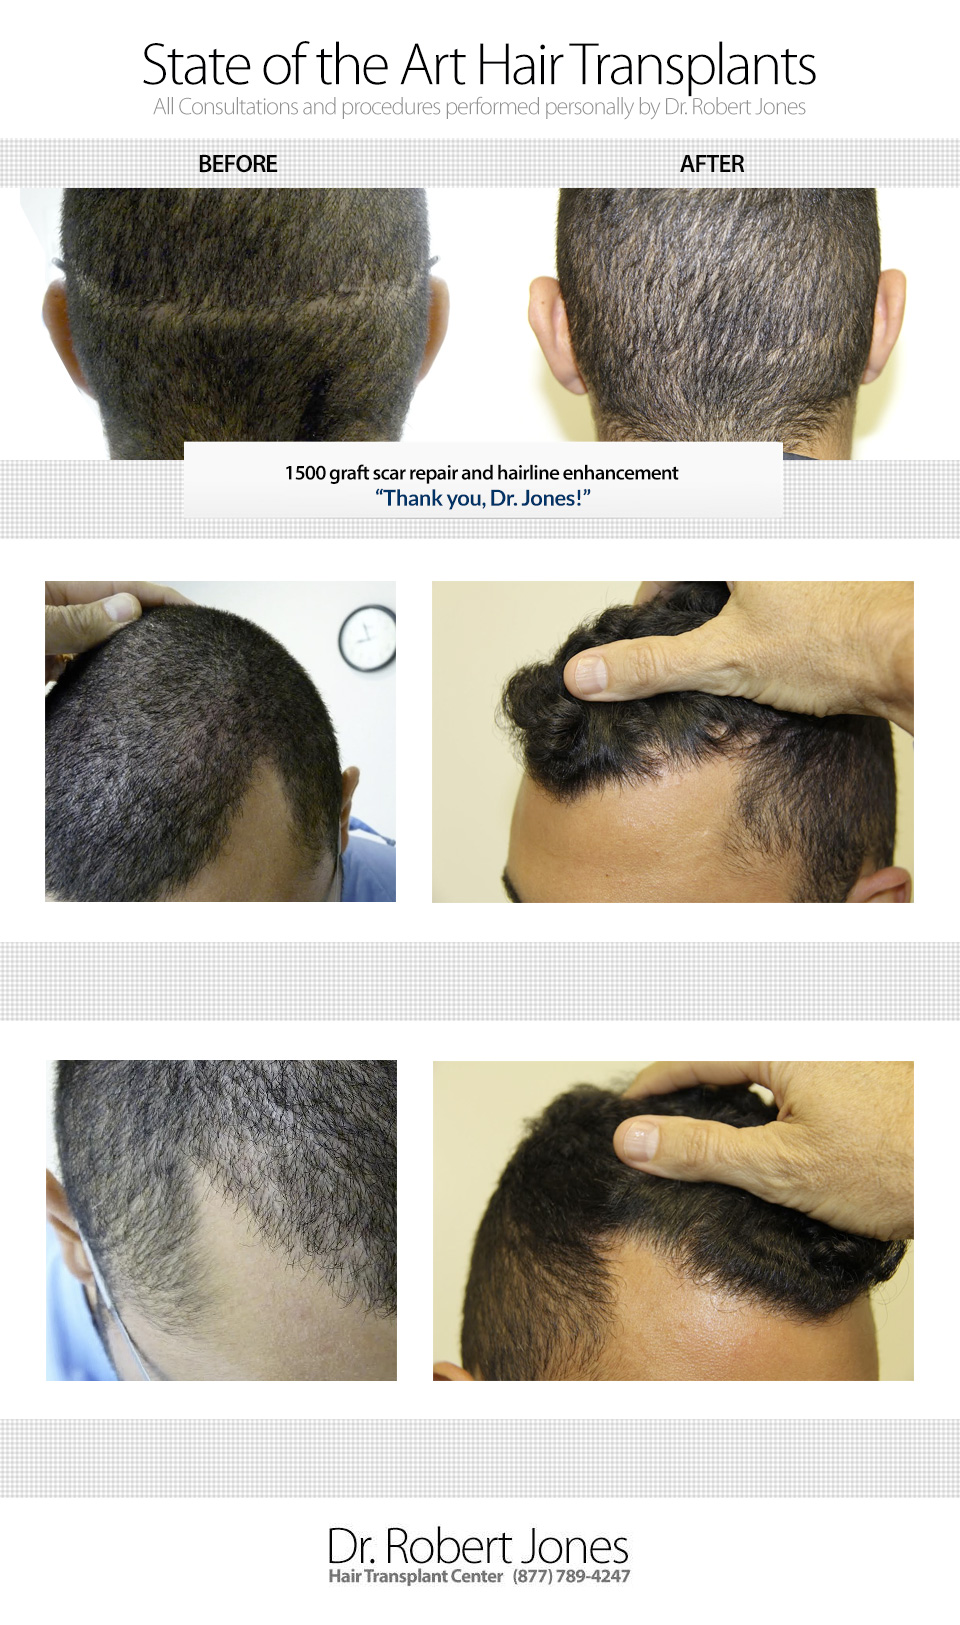 Before And After 1500 Grafts in Hairline